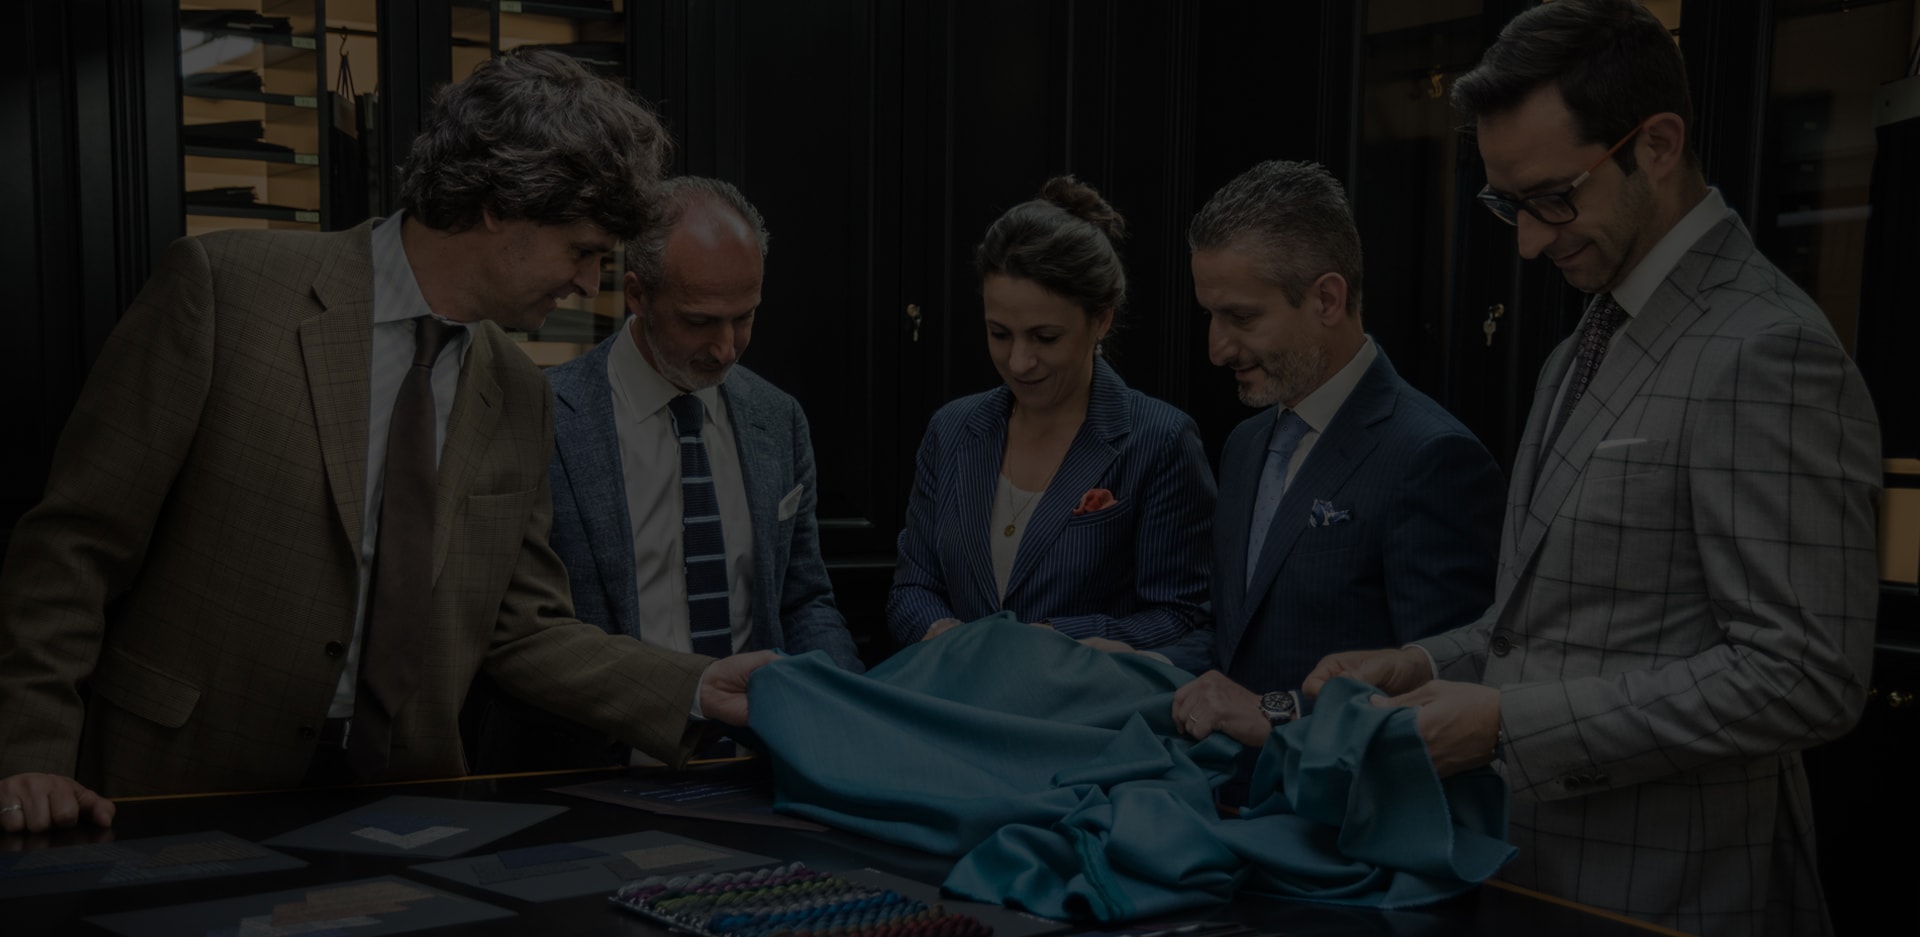 A group of people examine fabric.